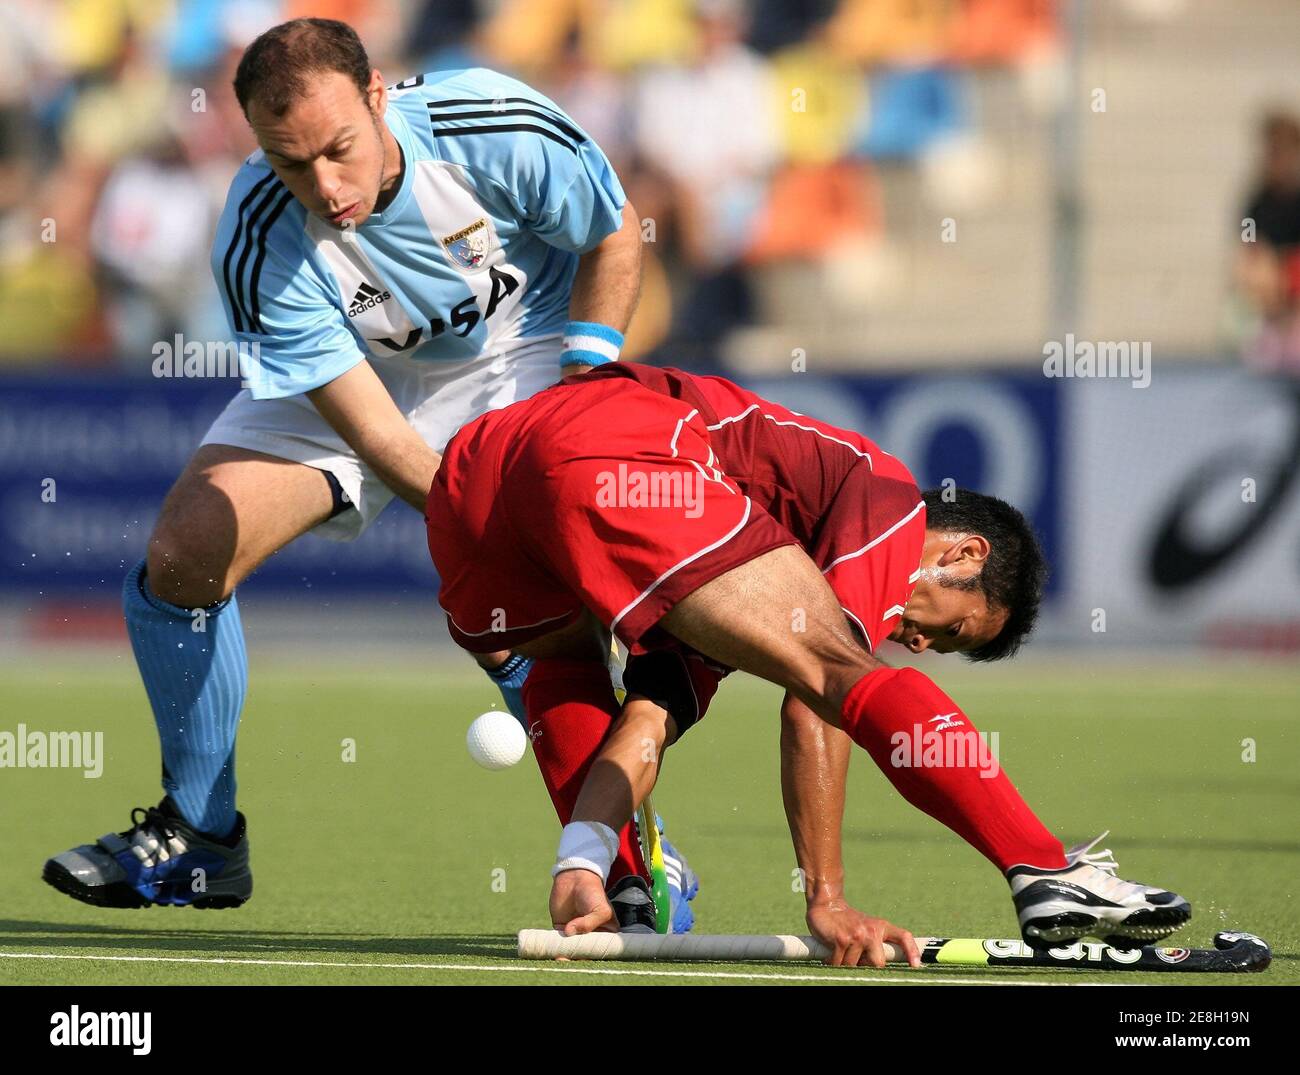 Japan's Yuji Chaki (R) fights for the ball with Argentina's Fernando Oscaris during their Men's Field Hockey World Cup match at the Warsteiner Hockey Park stadium in Moenchengladbach September 12, 2006. REUTERS/Pascal Lauener  (GERMANY) Stock Photo